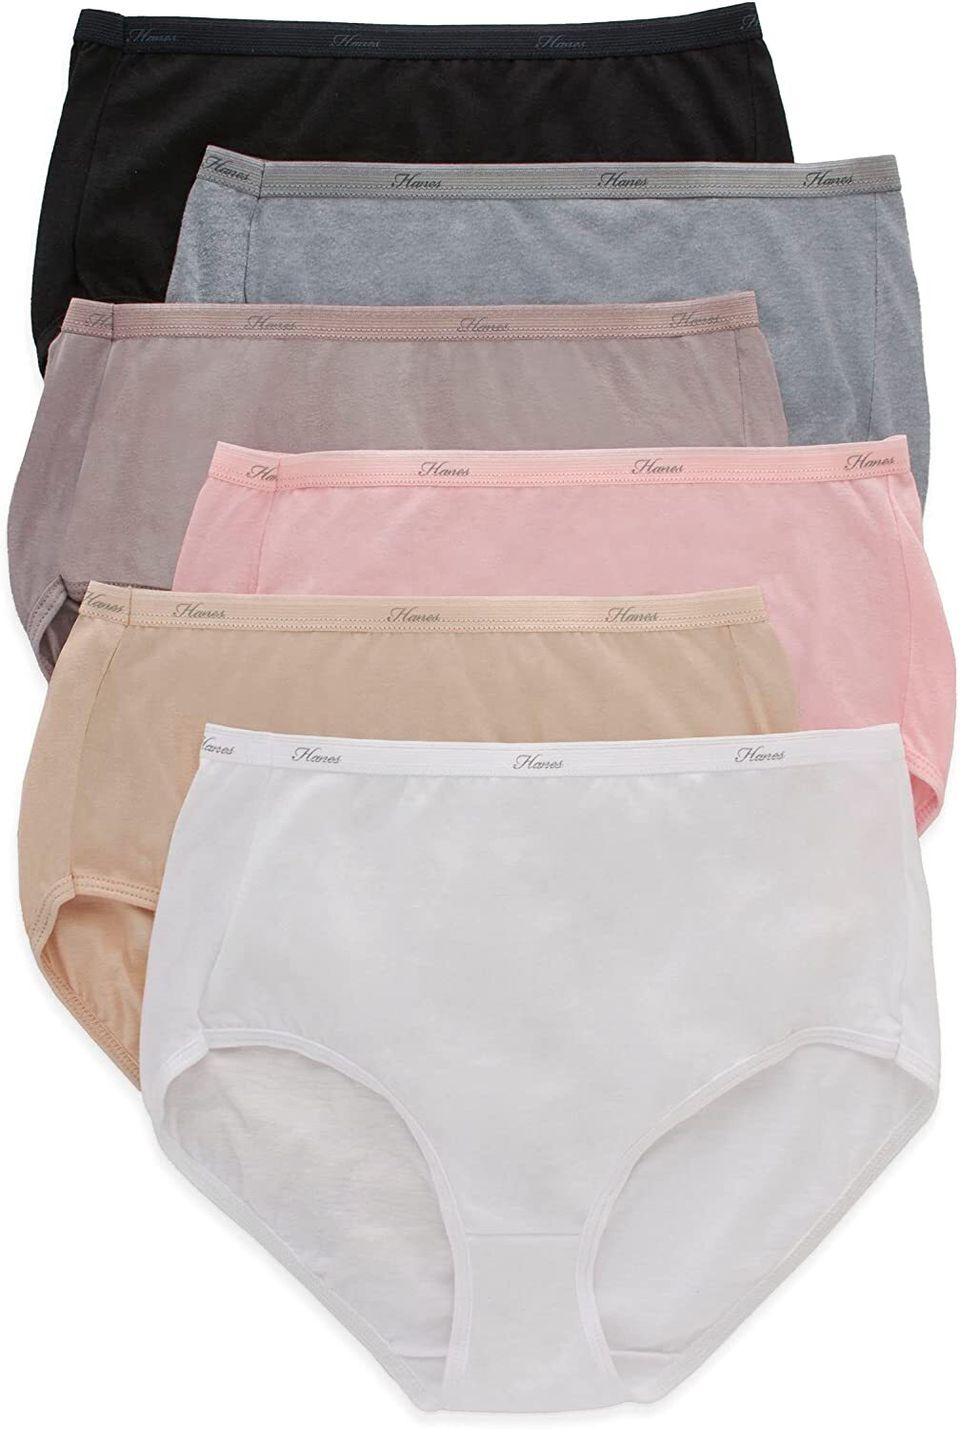 Krystal Women's Breathable Underwear, Moisture Wicking Keeps You Cool &  Comfortable, Waist Size (26 28) (Colours May Vary) Pack of 3